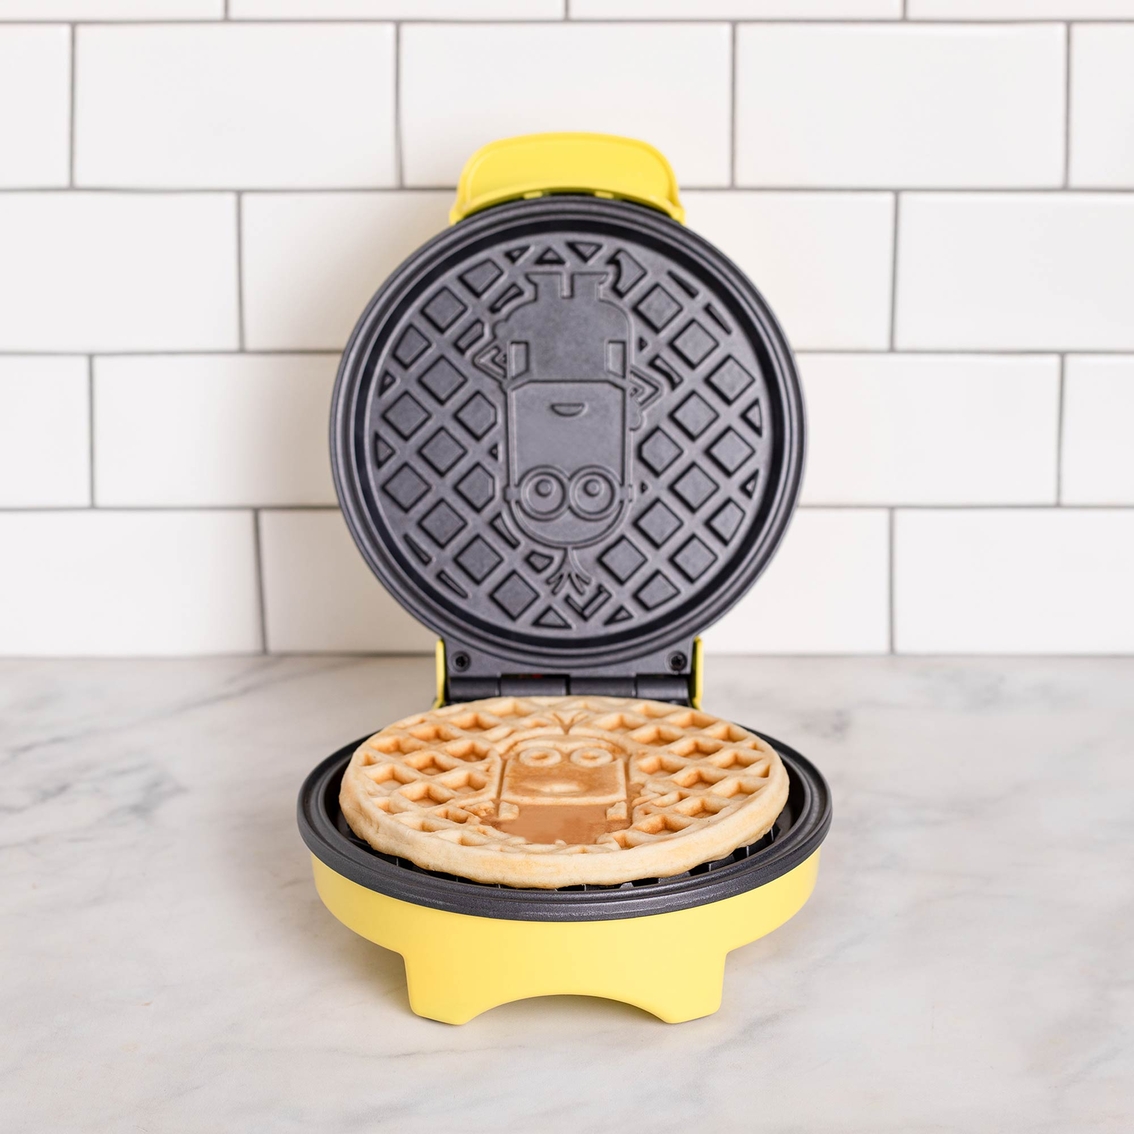 Minions Kevin Round Waffle Maker - Image 4 of 10